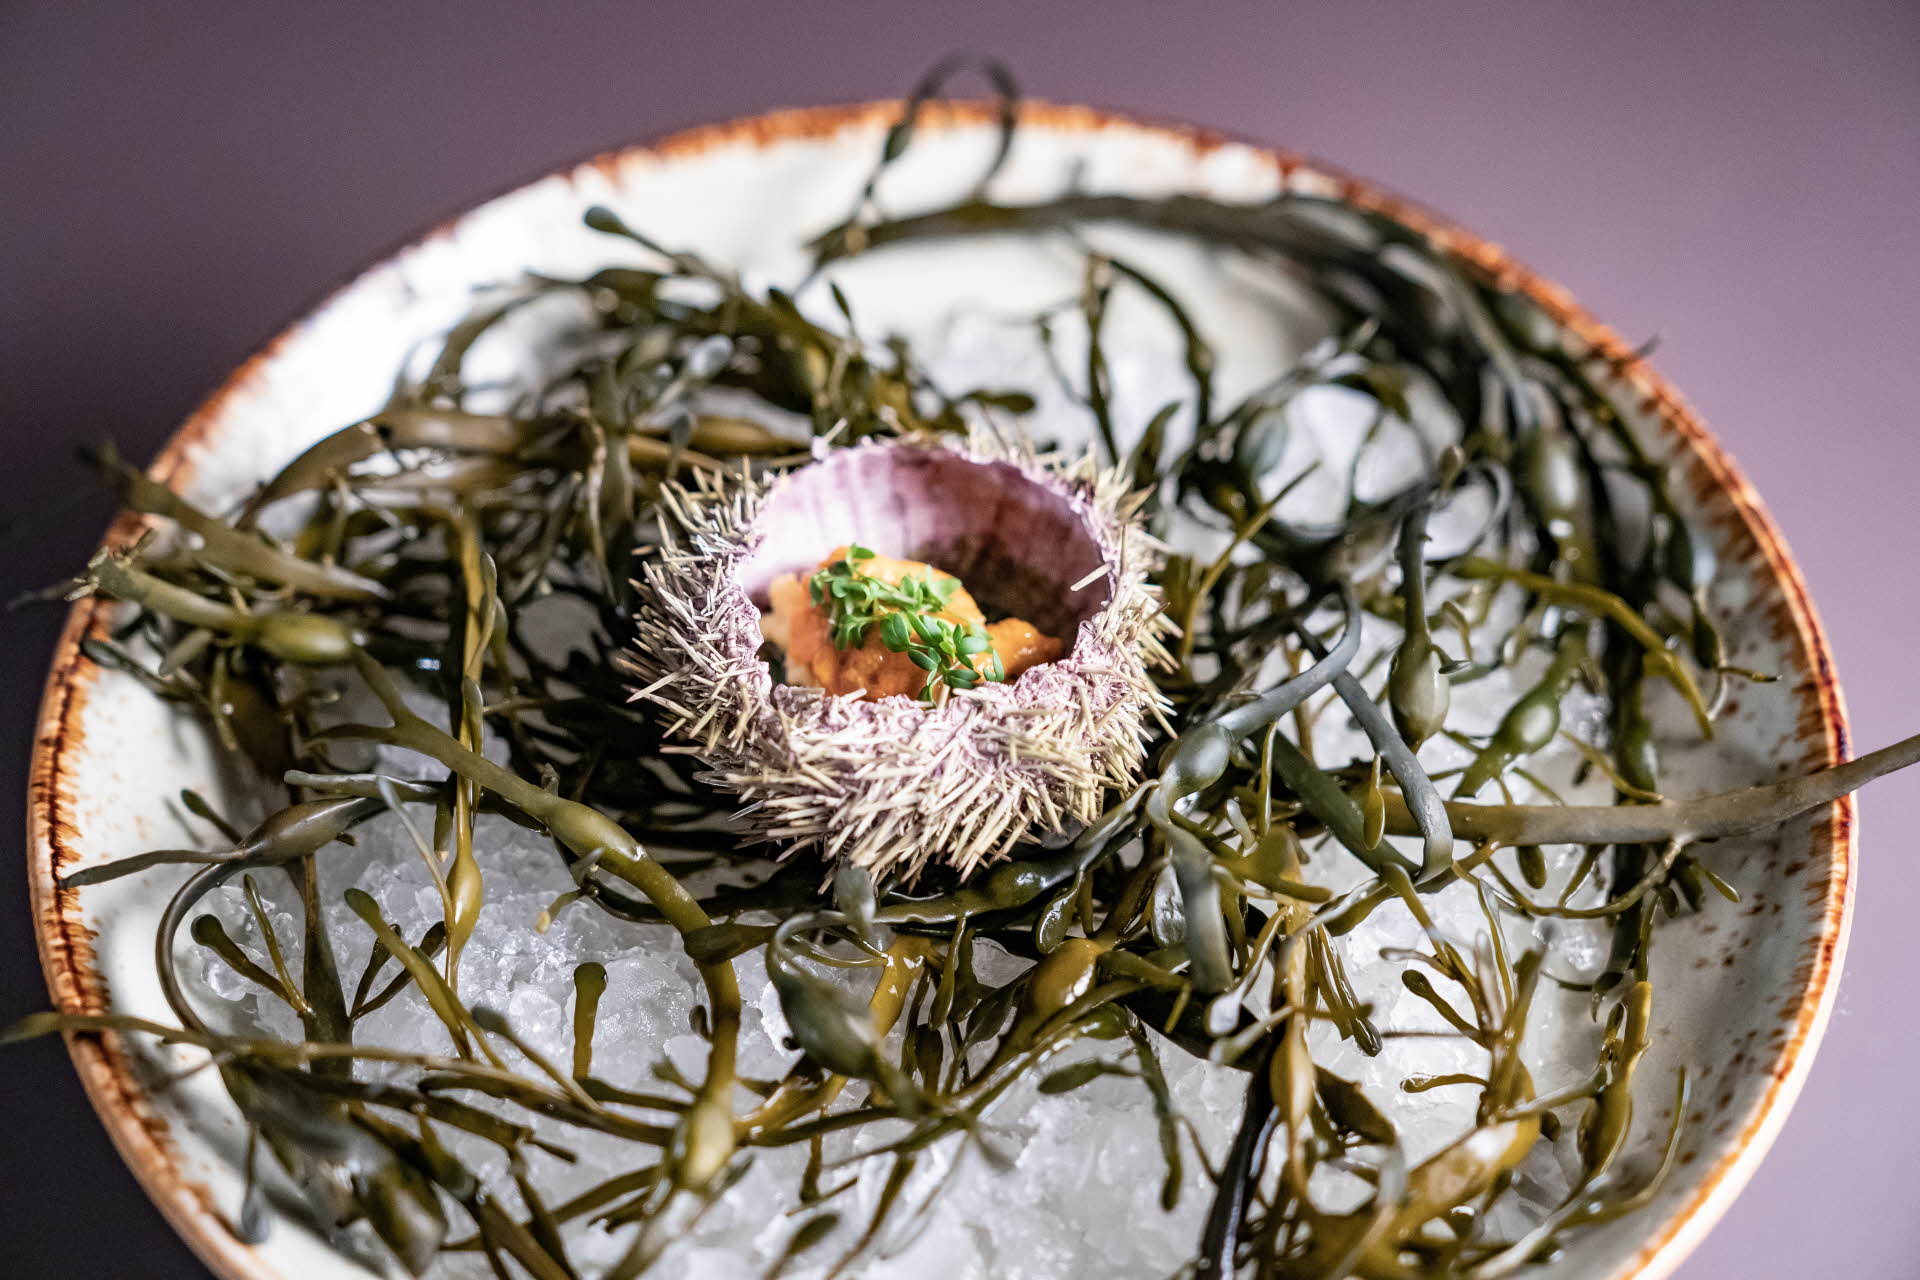 A plate filled with ice, seaweed and an open sea urchin.